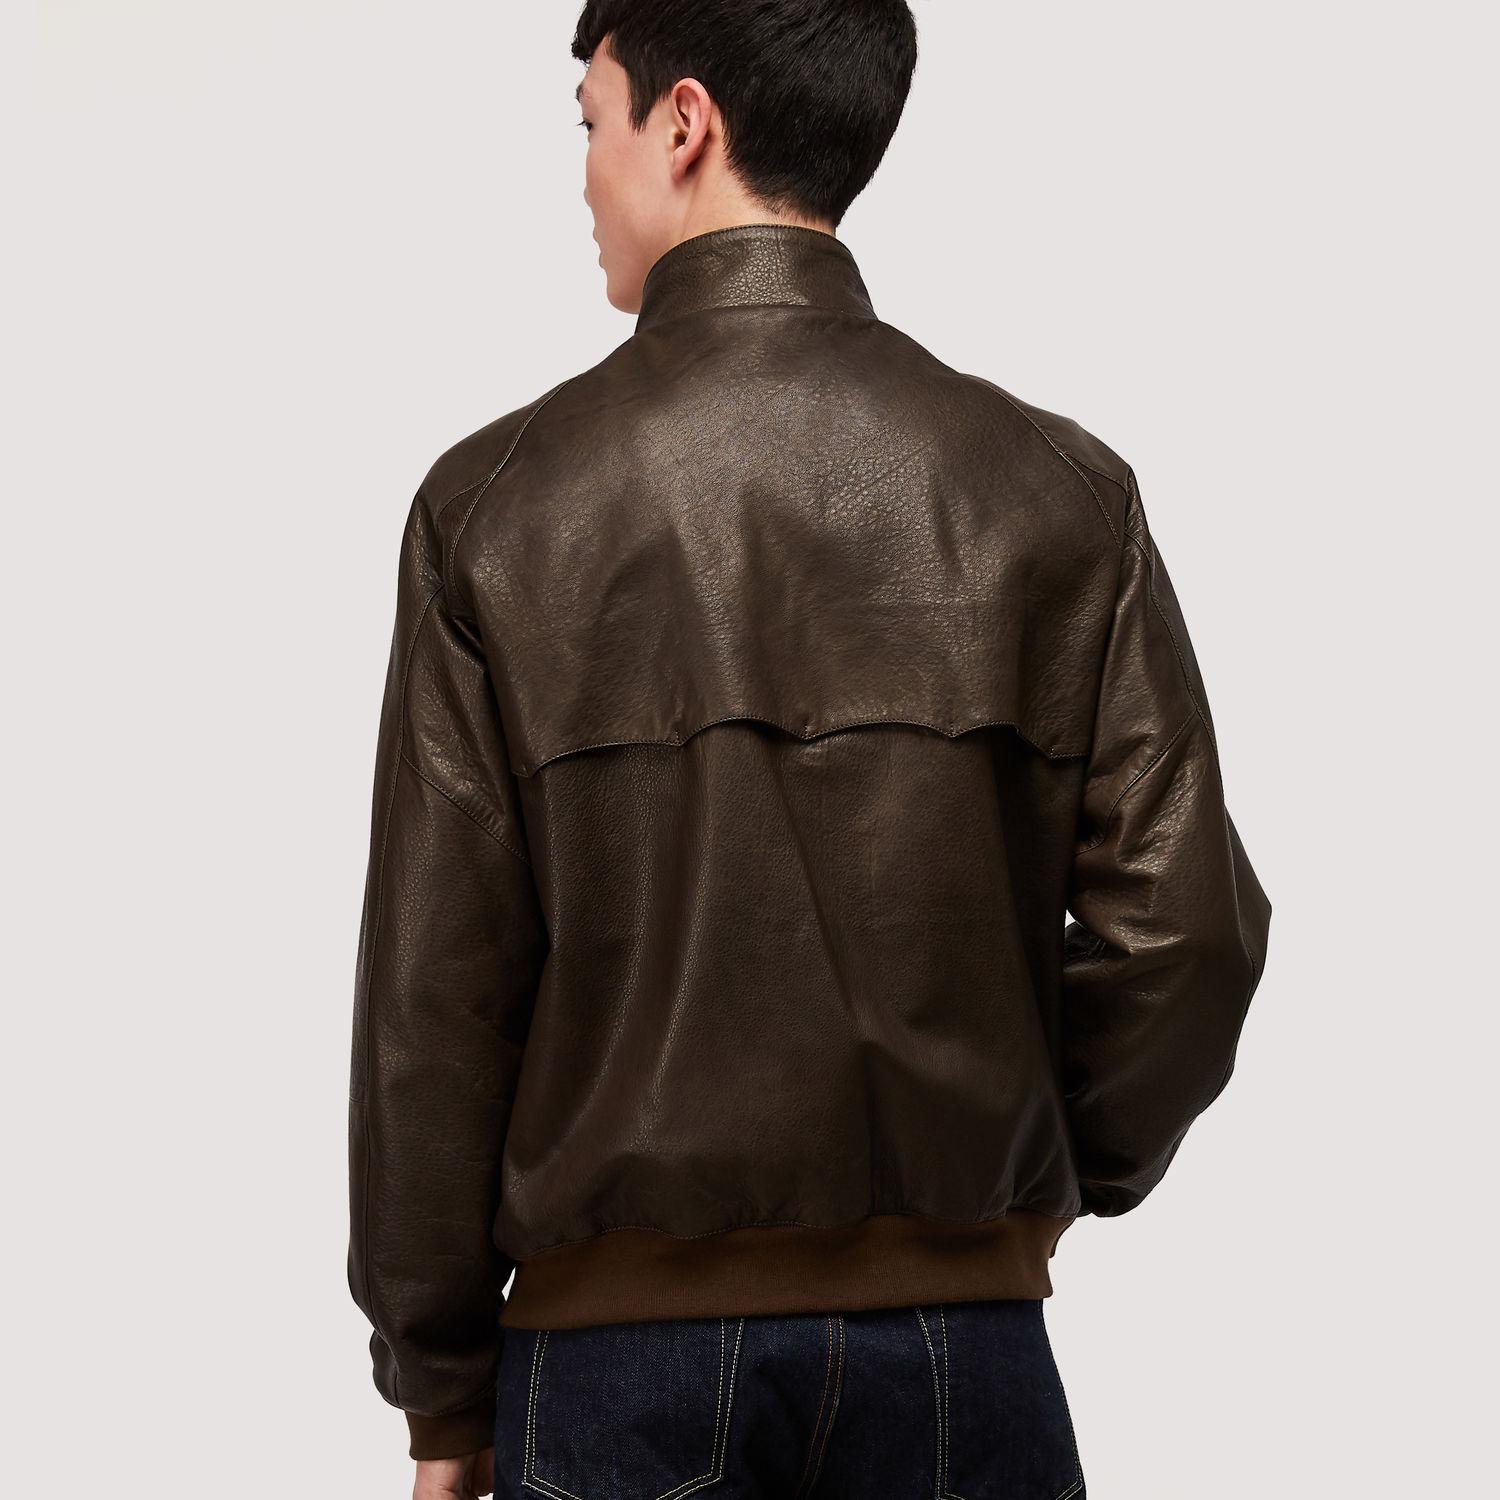 Baracuta G9 Leather in Taupe (Brown) for Men - Lyst